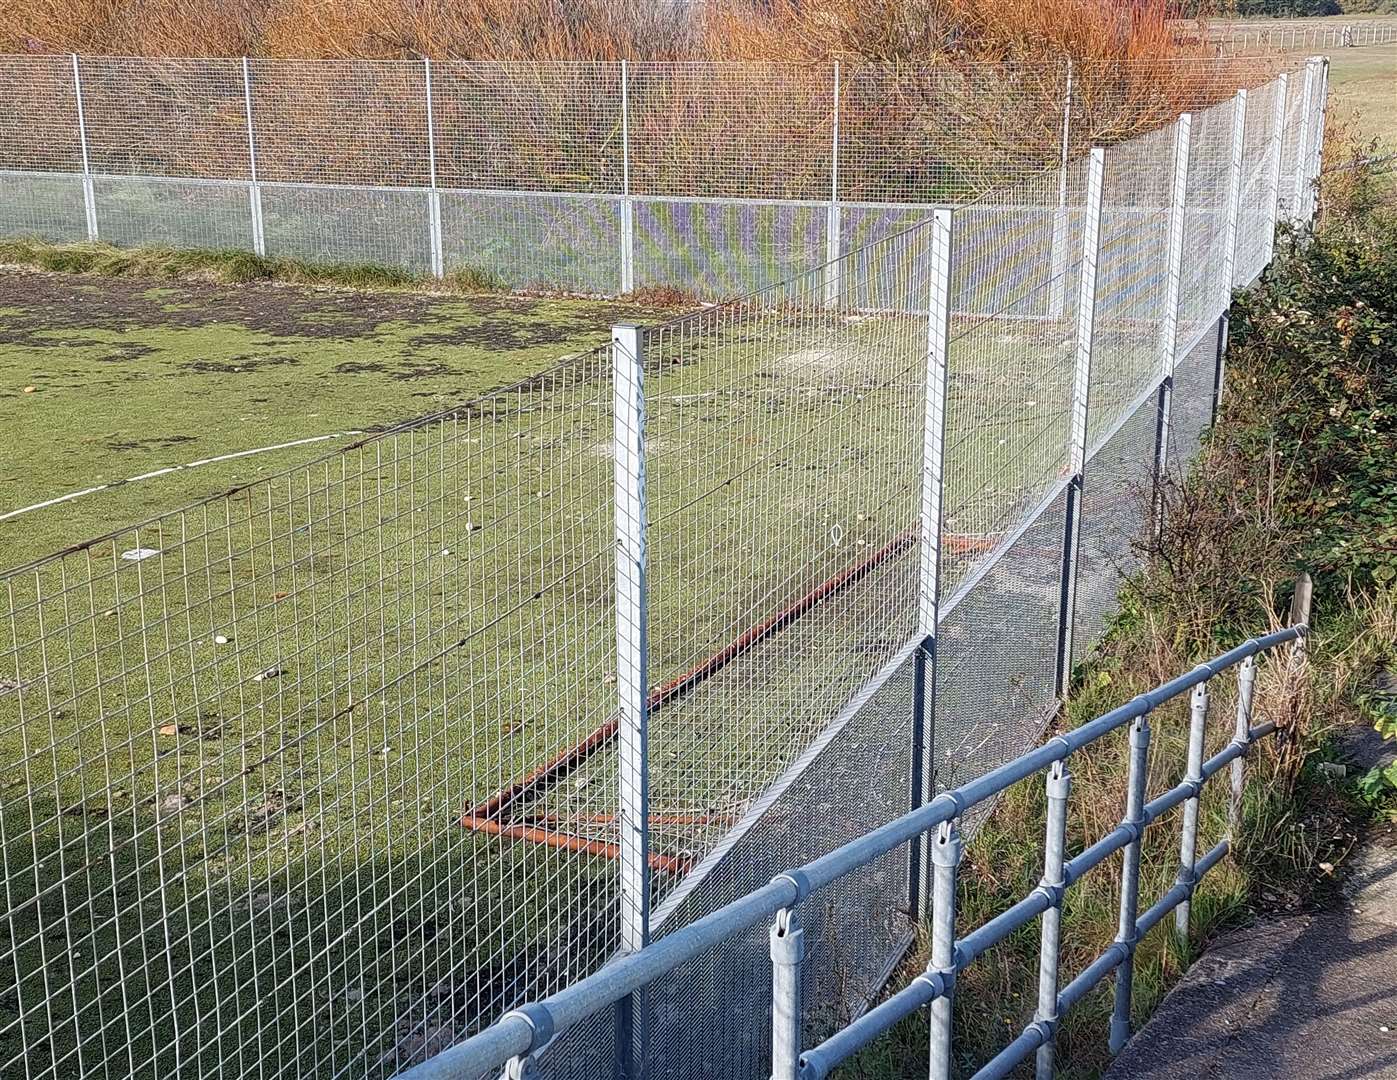 The neglected astroturf pitch at Pirate Springs